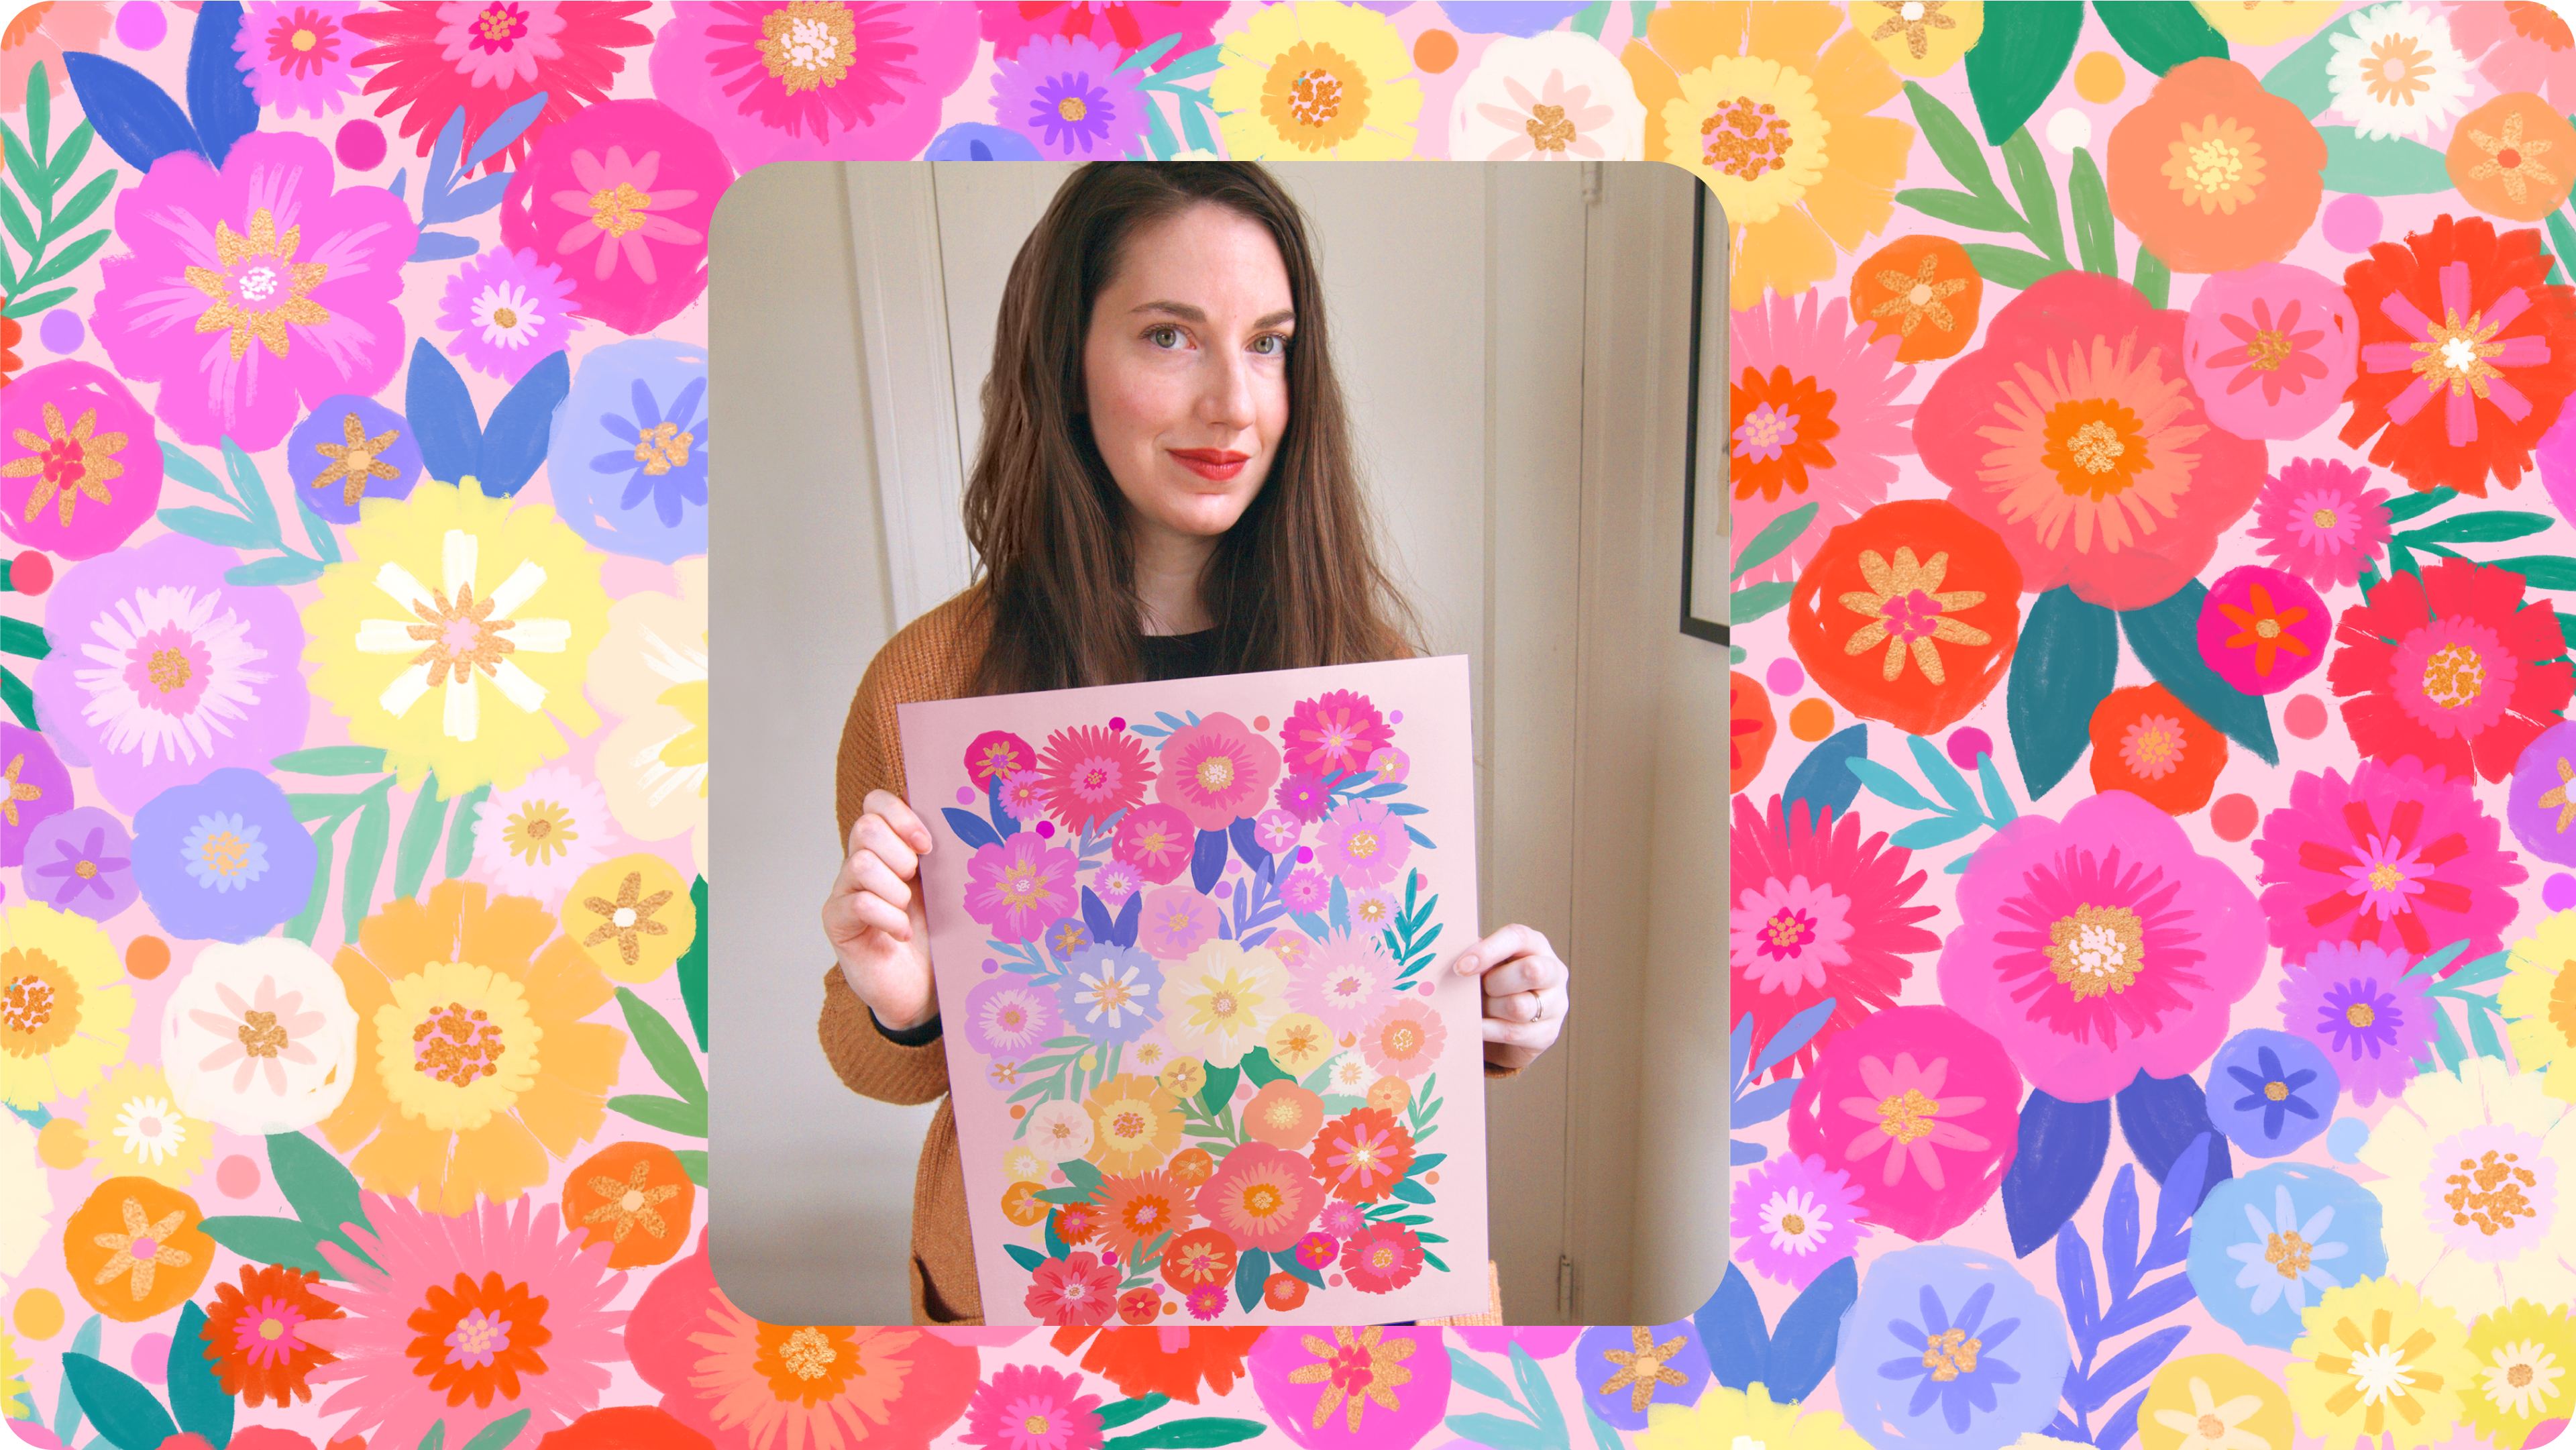 Meet Jess Phoenix: The Artist Behind Our Mother’s Day Floral, Rainbow Blooms